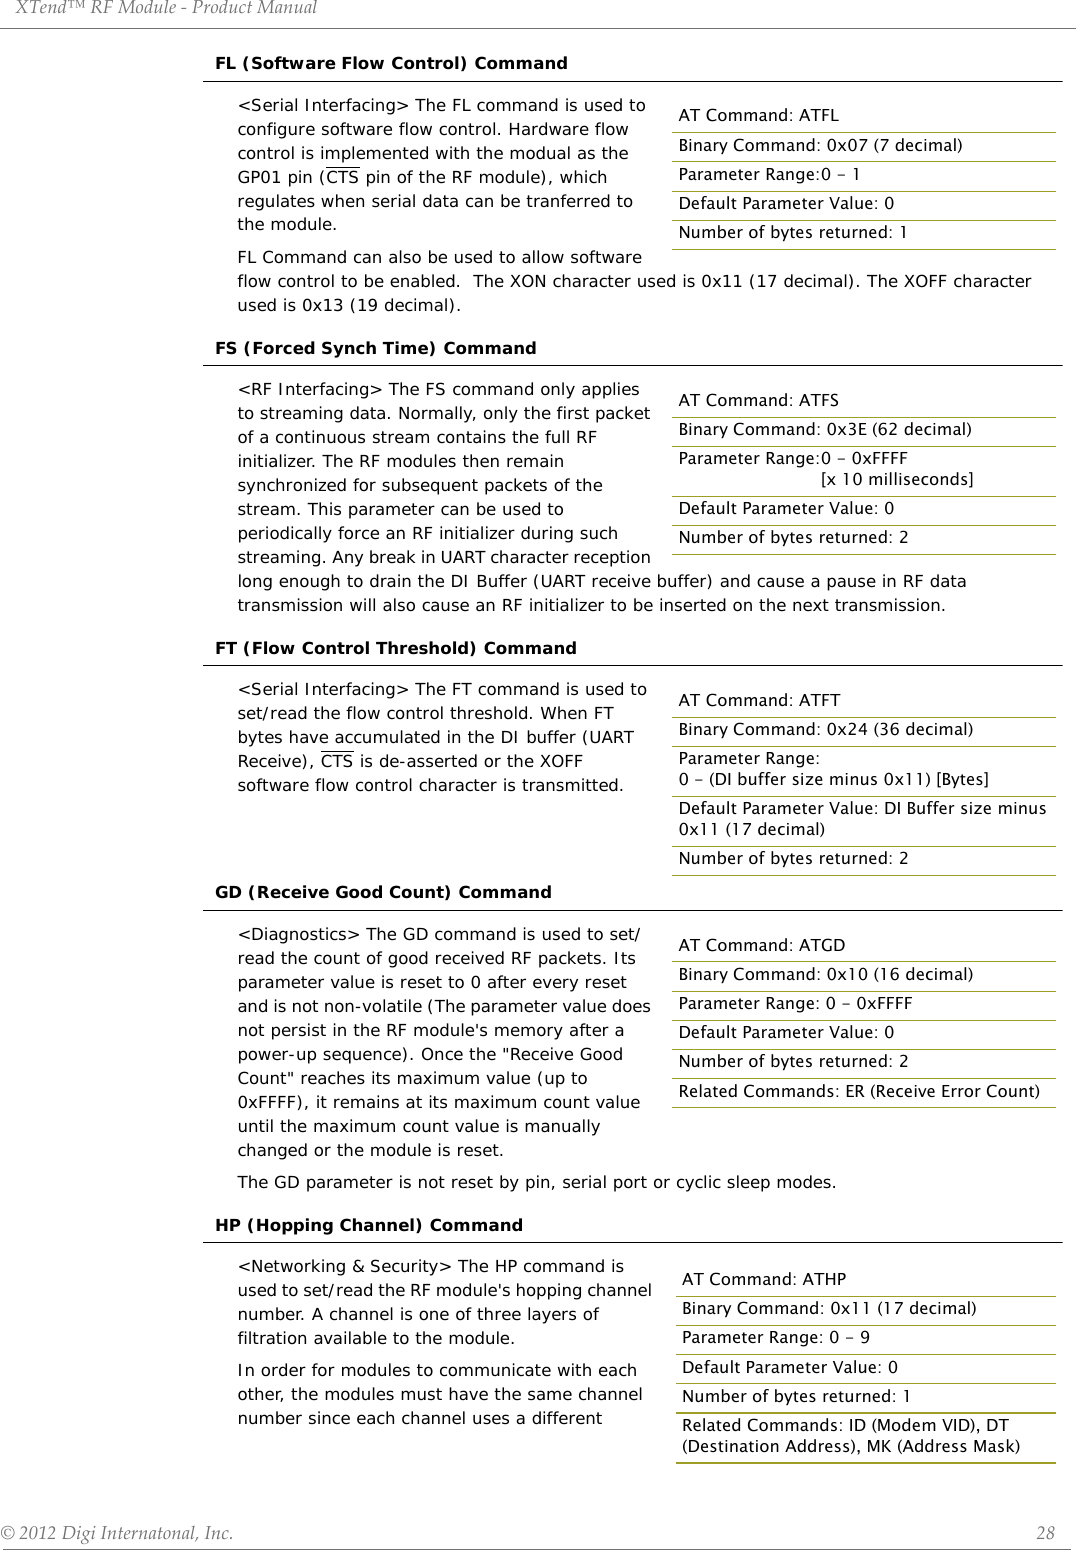 XTend™ RF Module - Product Manual © 2012 Digi Internatonal, Inc.      28FL (Software Flow Control) Command&lt;Serial Interfacing&gt; The FL command is used to configure software flow control. Hardware flow control is implemented with the modual as the GP01 pin (CTS pin of the RF module), which regulates when serial data can be tranferred to the module. FL Command can also be used to allow software flow control to be enabled.  The XON character used is 0x11 (17 decimal). The XOFF character used is 0x13 (19 decimal).FS (Forced Synch Time) Command&lt;RF Interfacing&gt; The FS command only applies to streaming data. Normally, only the first packet of a continuous stream contains the full RF initializer. The RF modules then remain synchronized for subsequent packets of the stream. This parameter can be used to periodically force an RF initializer during such streaming. Any break in UART character reception long enough to drain the DI Buffer (UART receive buffer) and cause a pause in RF data transmission will also cause an RF initializer to be inserted on the next transmission.FT (Flow Control Threshold) Command&lt;Serial Interfacing&gt; The FT command is used to set/read the flow control threshold. When FT bytes have accumulated in the DI buffer (UART Receive), CTS is de-asserted or the XOFF software flow control character is transmitted.GD (Receive Good Count) Command&lt;Diagnostics&gt; The GD command is used to set/read the count of good received RF packets. Its parameter value is reset to 0 after every reset and is not non-volatile (The parameter value does not persist in the RF module&apos;s memory after a power-up sequence). Once the &quot;Receive Good Count&quot; reaches its maximum value (up to 0xFFFF), it remains at its maximum count value until the maximum count value is manually changed or the module is reset.The GD parameter is not reset by pin, serial port or cyclic sleep modes.HP (Hopping Channel) Command&lt;Networking &amp; Security&gt; The HP command is used to set/read the RF module&apos;s hopping channel number. A channel is one of three layers of filtration available to the module. In order for modules to communicate with each other, the modules must have the same channel number since each channel uses a different AT Command: ATFLBinary Command: 0x07 (7 decimal)Parameter Range:0 - 1Default Parameter Value: 0Number of bytes returned: 1AT Command: ATFSBinary Command: 0x3E (62 decimal)Parameter Range:0 - 0xFFFF [x 10 milliseconds]Default Parameter Value: 0Number of bytes returned: 2AT Command: ATFTBinary Command: 0x24 (36 decimal)Parameter Range:0 - (DI buffer size minus 0x11) [Bytes]Default Parameter Value: DI Buffer size minus 0x11 (17 decimal)Number of bytes returned: 2AT Command: ATGDBinary Command: 0x10 (16 decimal)Parameter Range: 0 - 0xFFFFDefault Parameter Value: 0Number of bytes returned: 2Related Commands: ER (Receive Error Count) AT Command: ATHPBinary Command: 0x11 (17 decimal)Parameter Range: 0 - 9Default Parameter Value: 0Number of bytes returned: 1Related Commands: ID (Modem VID), DT (Destination Address), MK (Address Mask)